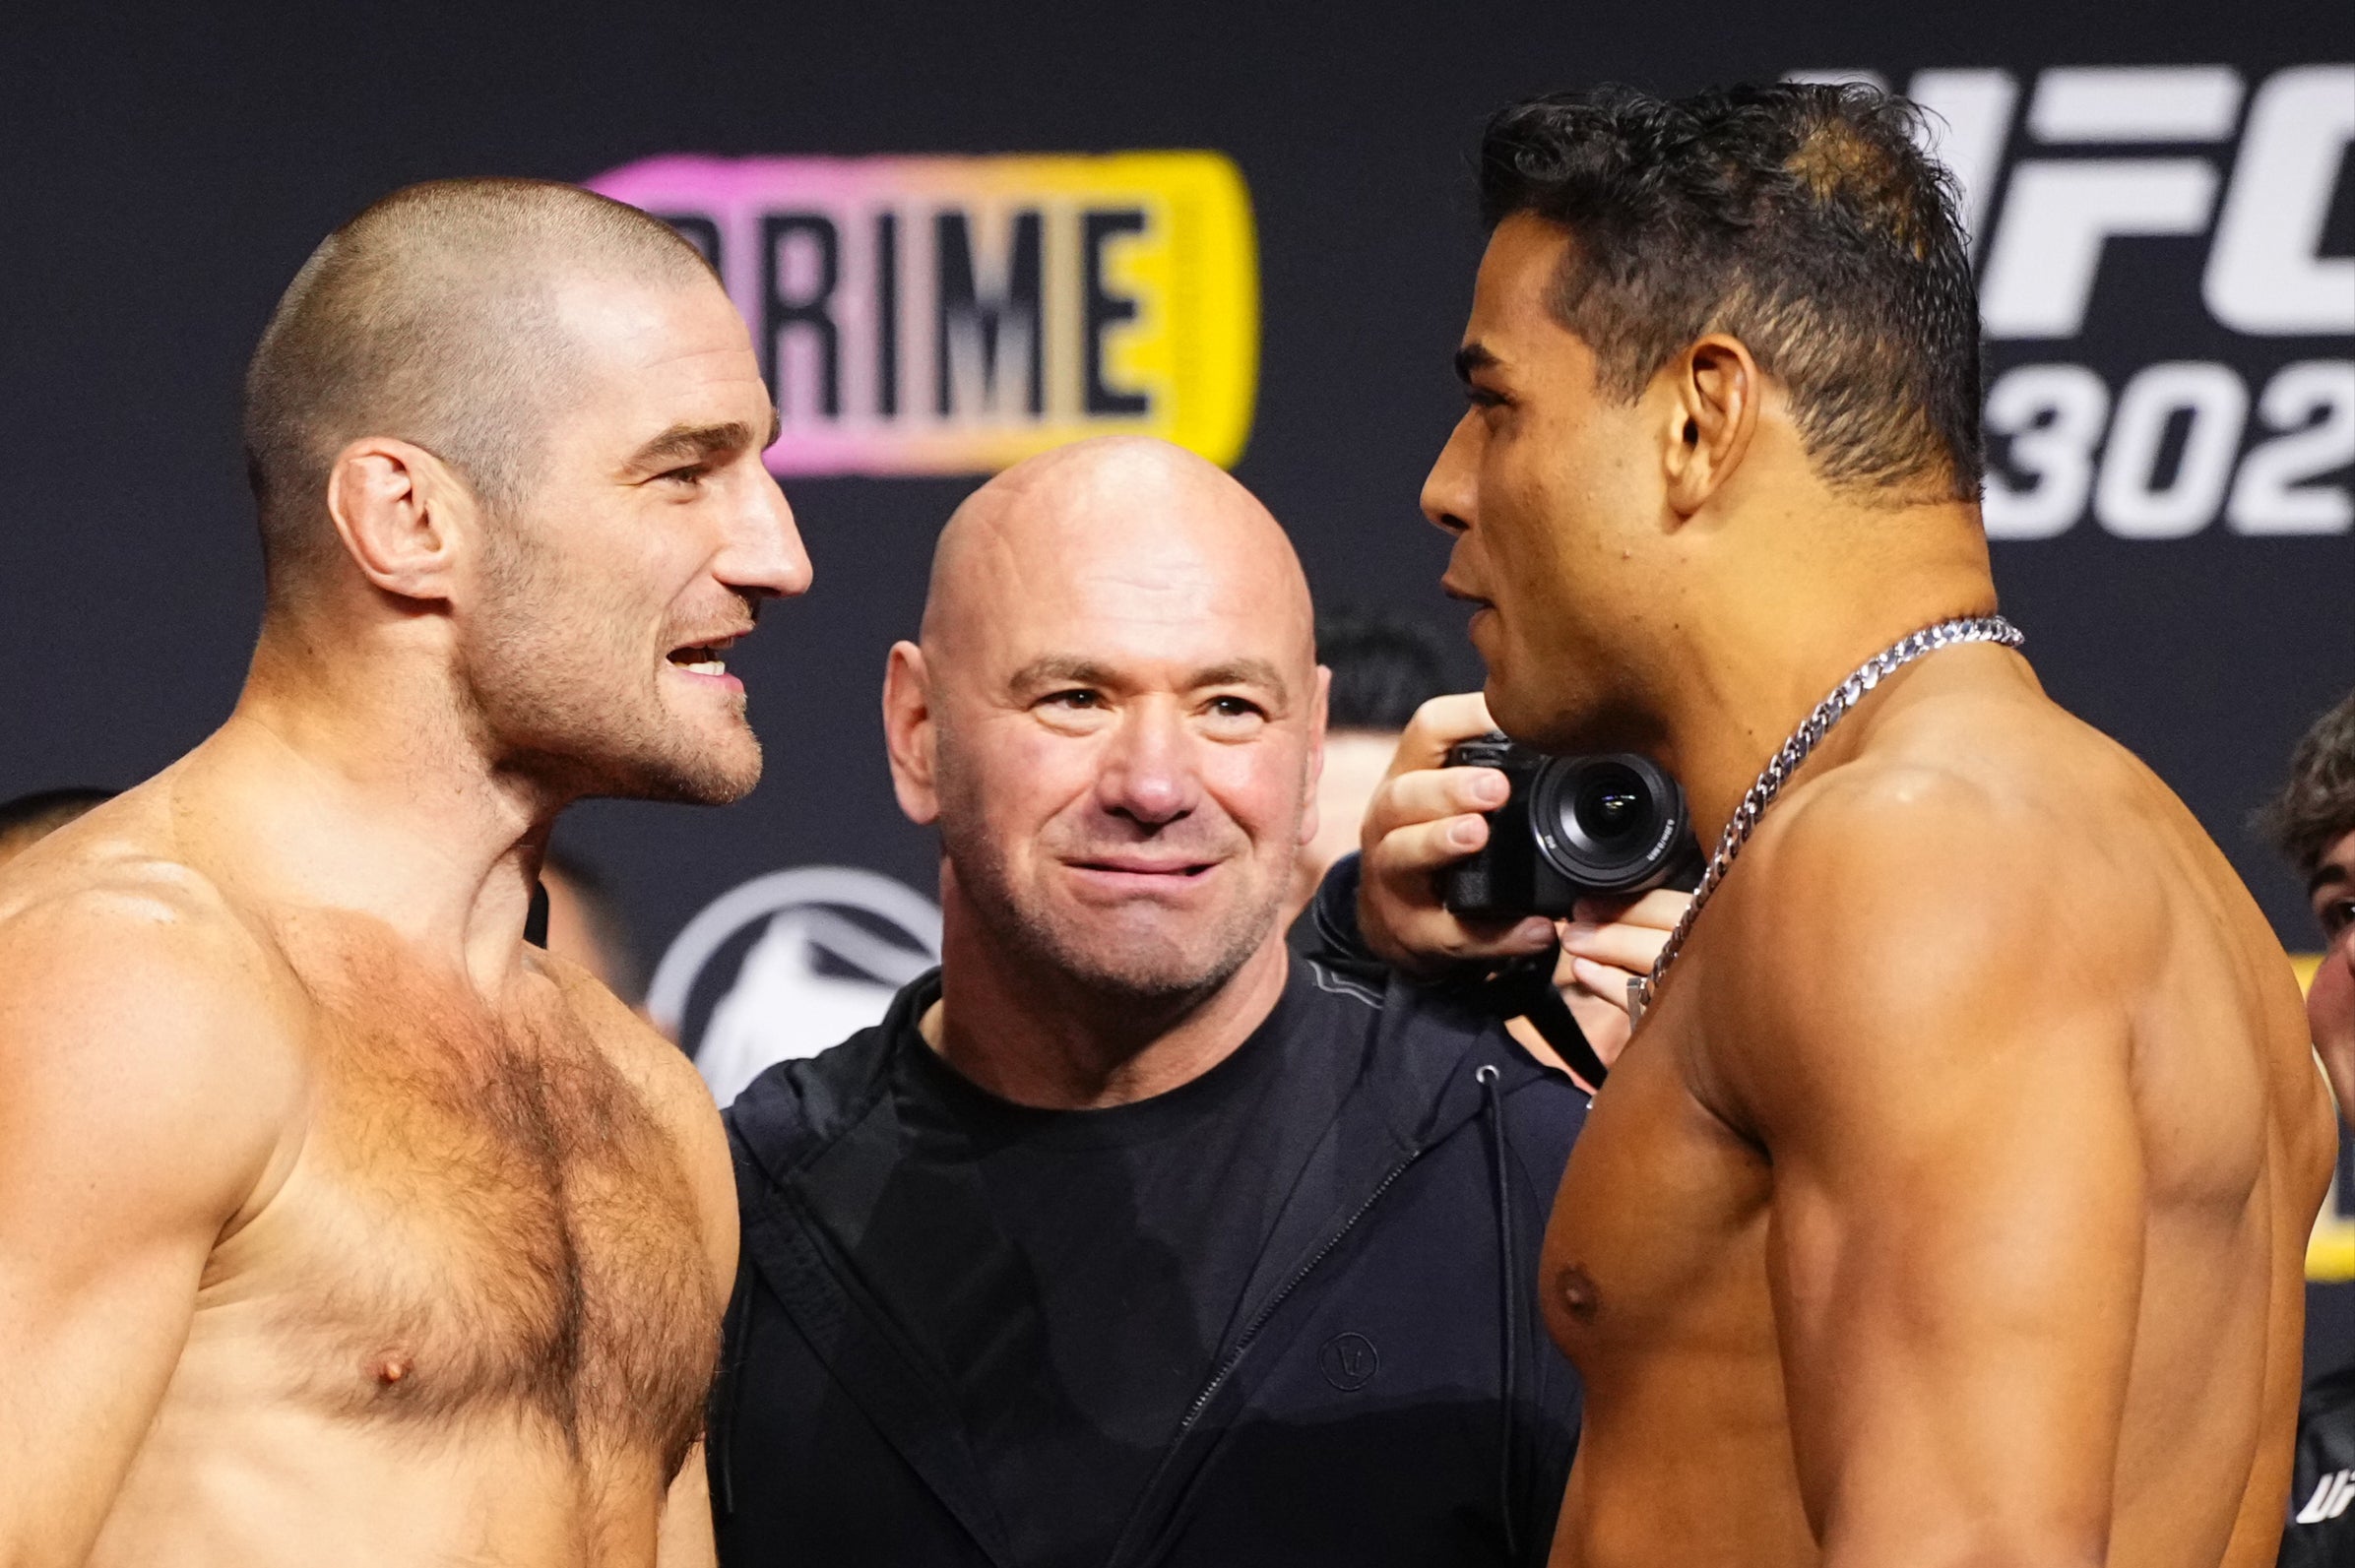 Sean Strickland (left) and Paulo Costa at Friday’s UFC 302 weigh-in